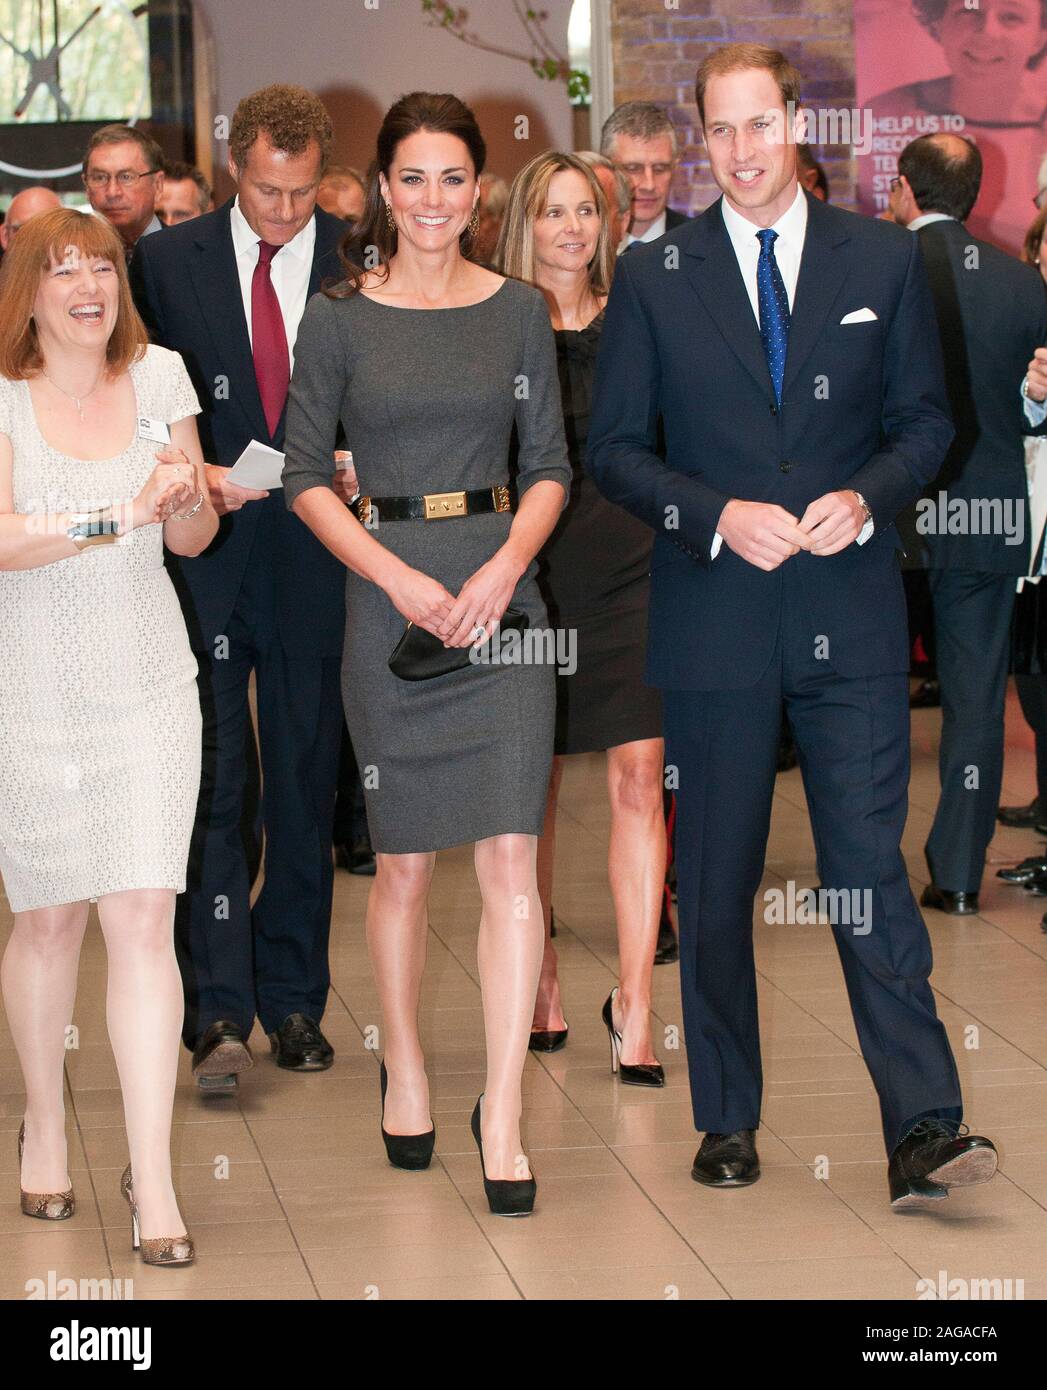 The Duke and Duchess of Cambridge attending a fund raising function at the Imperial War museum in London, with Viscount Rothermere chairman of the IWM Foundation and his wife Claudia, Viscountess Rothermere. Stock Photo